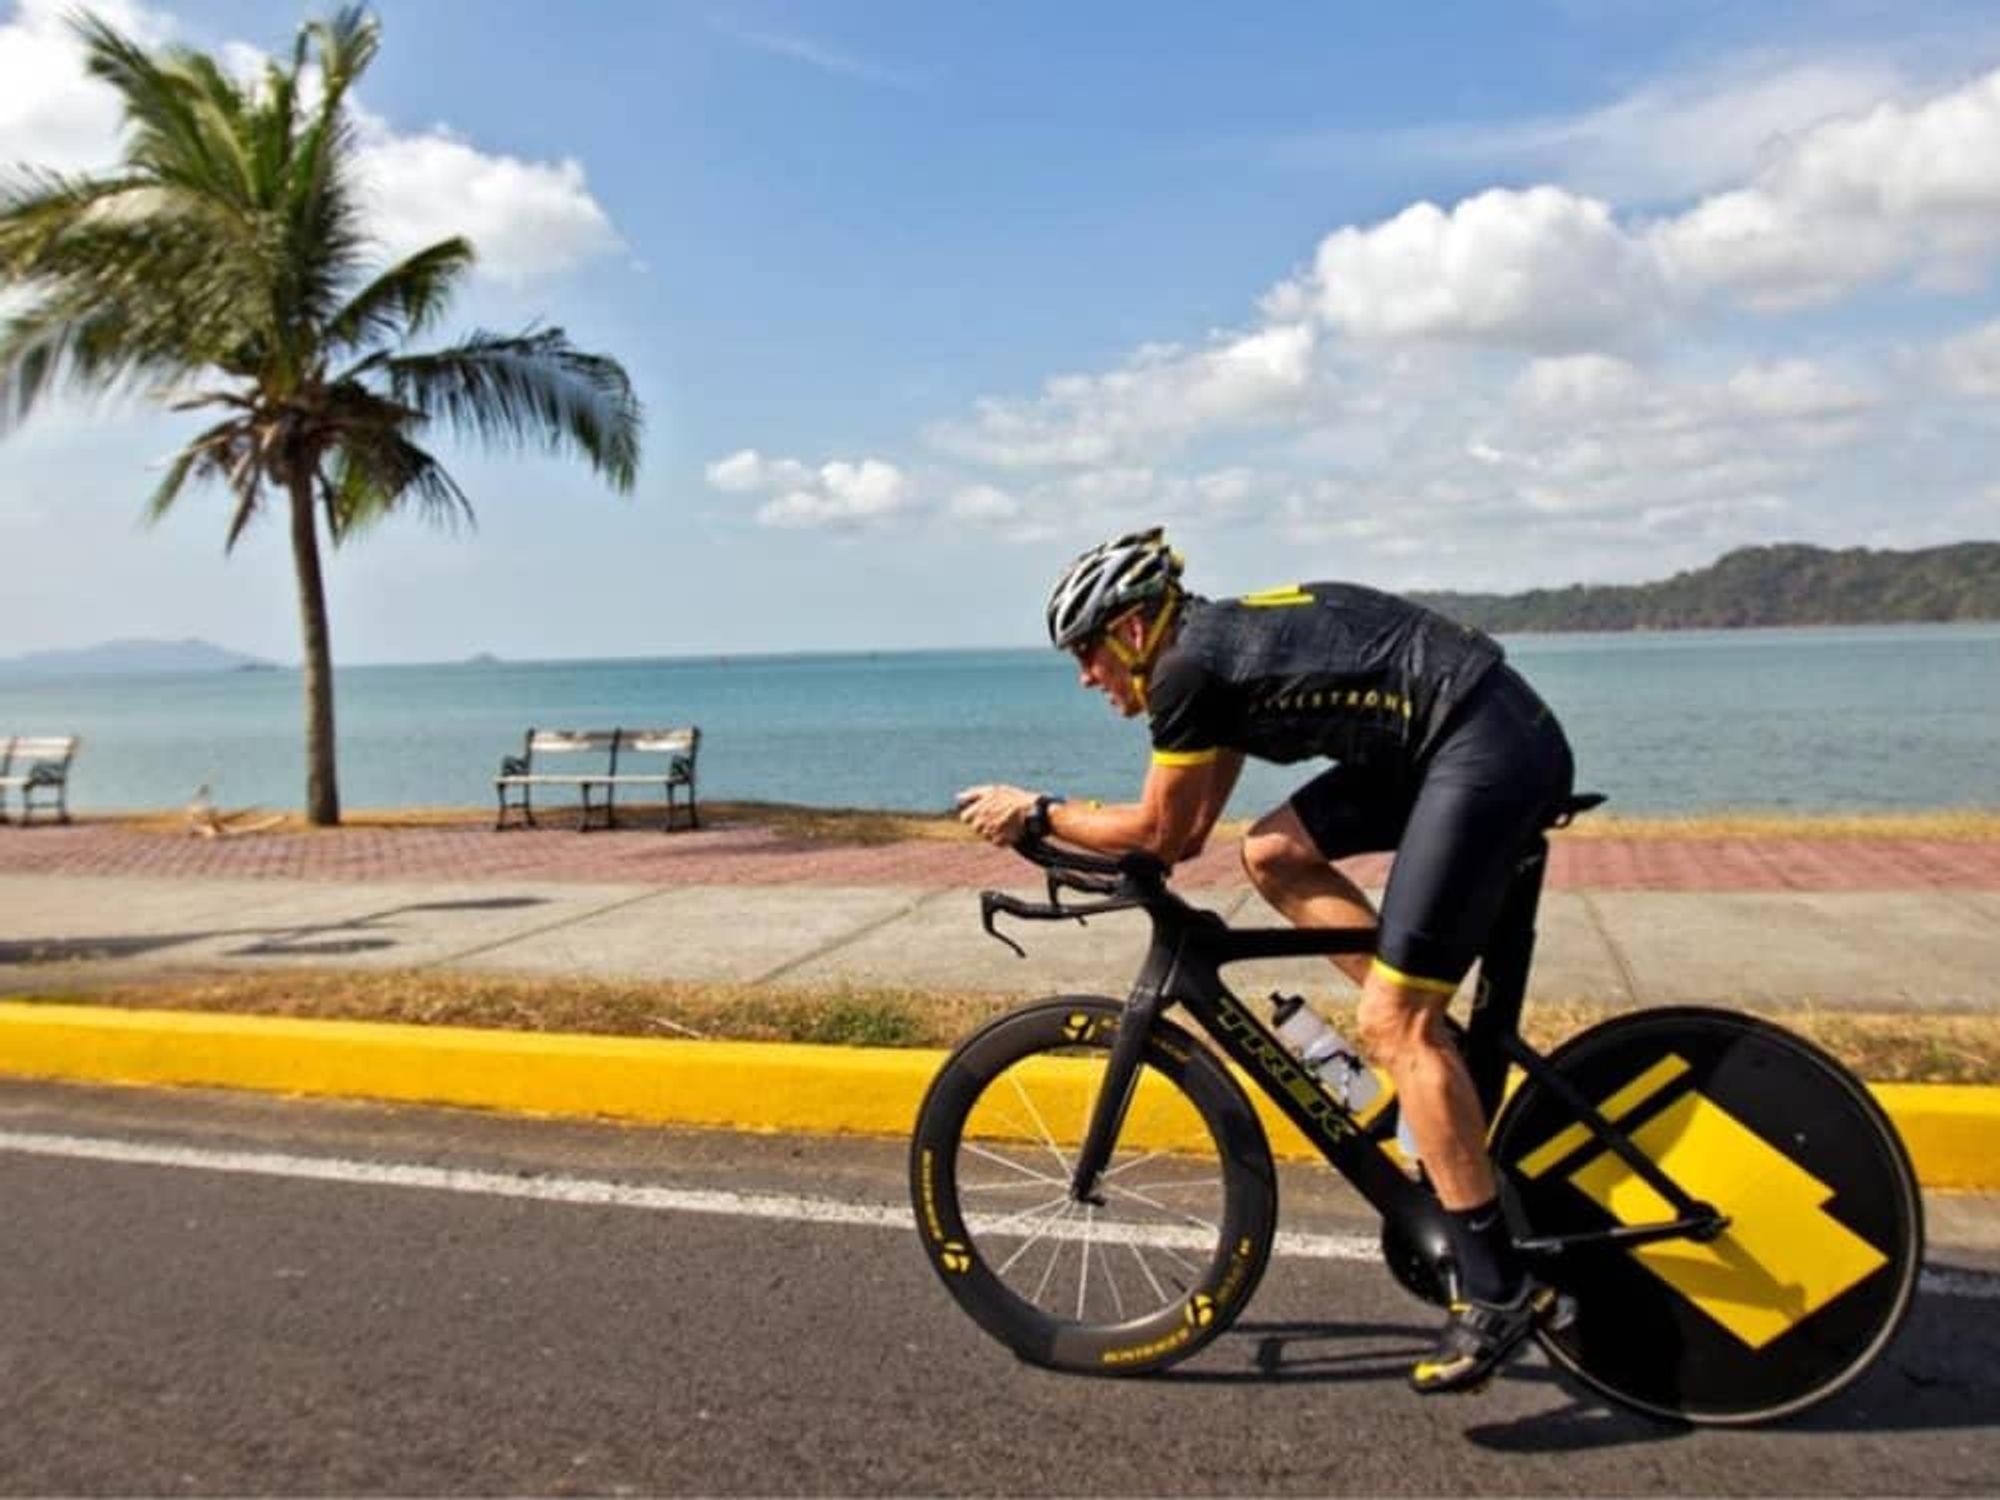 Lance Armstrong riding his bike along the beach